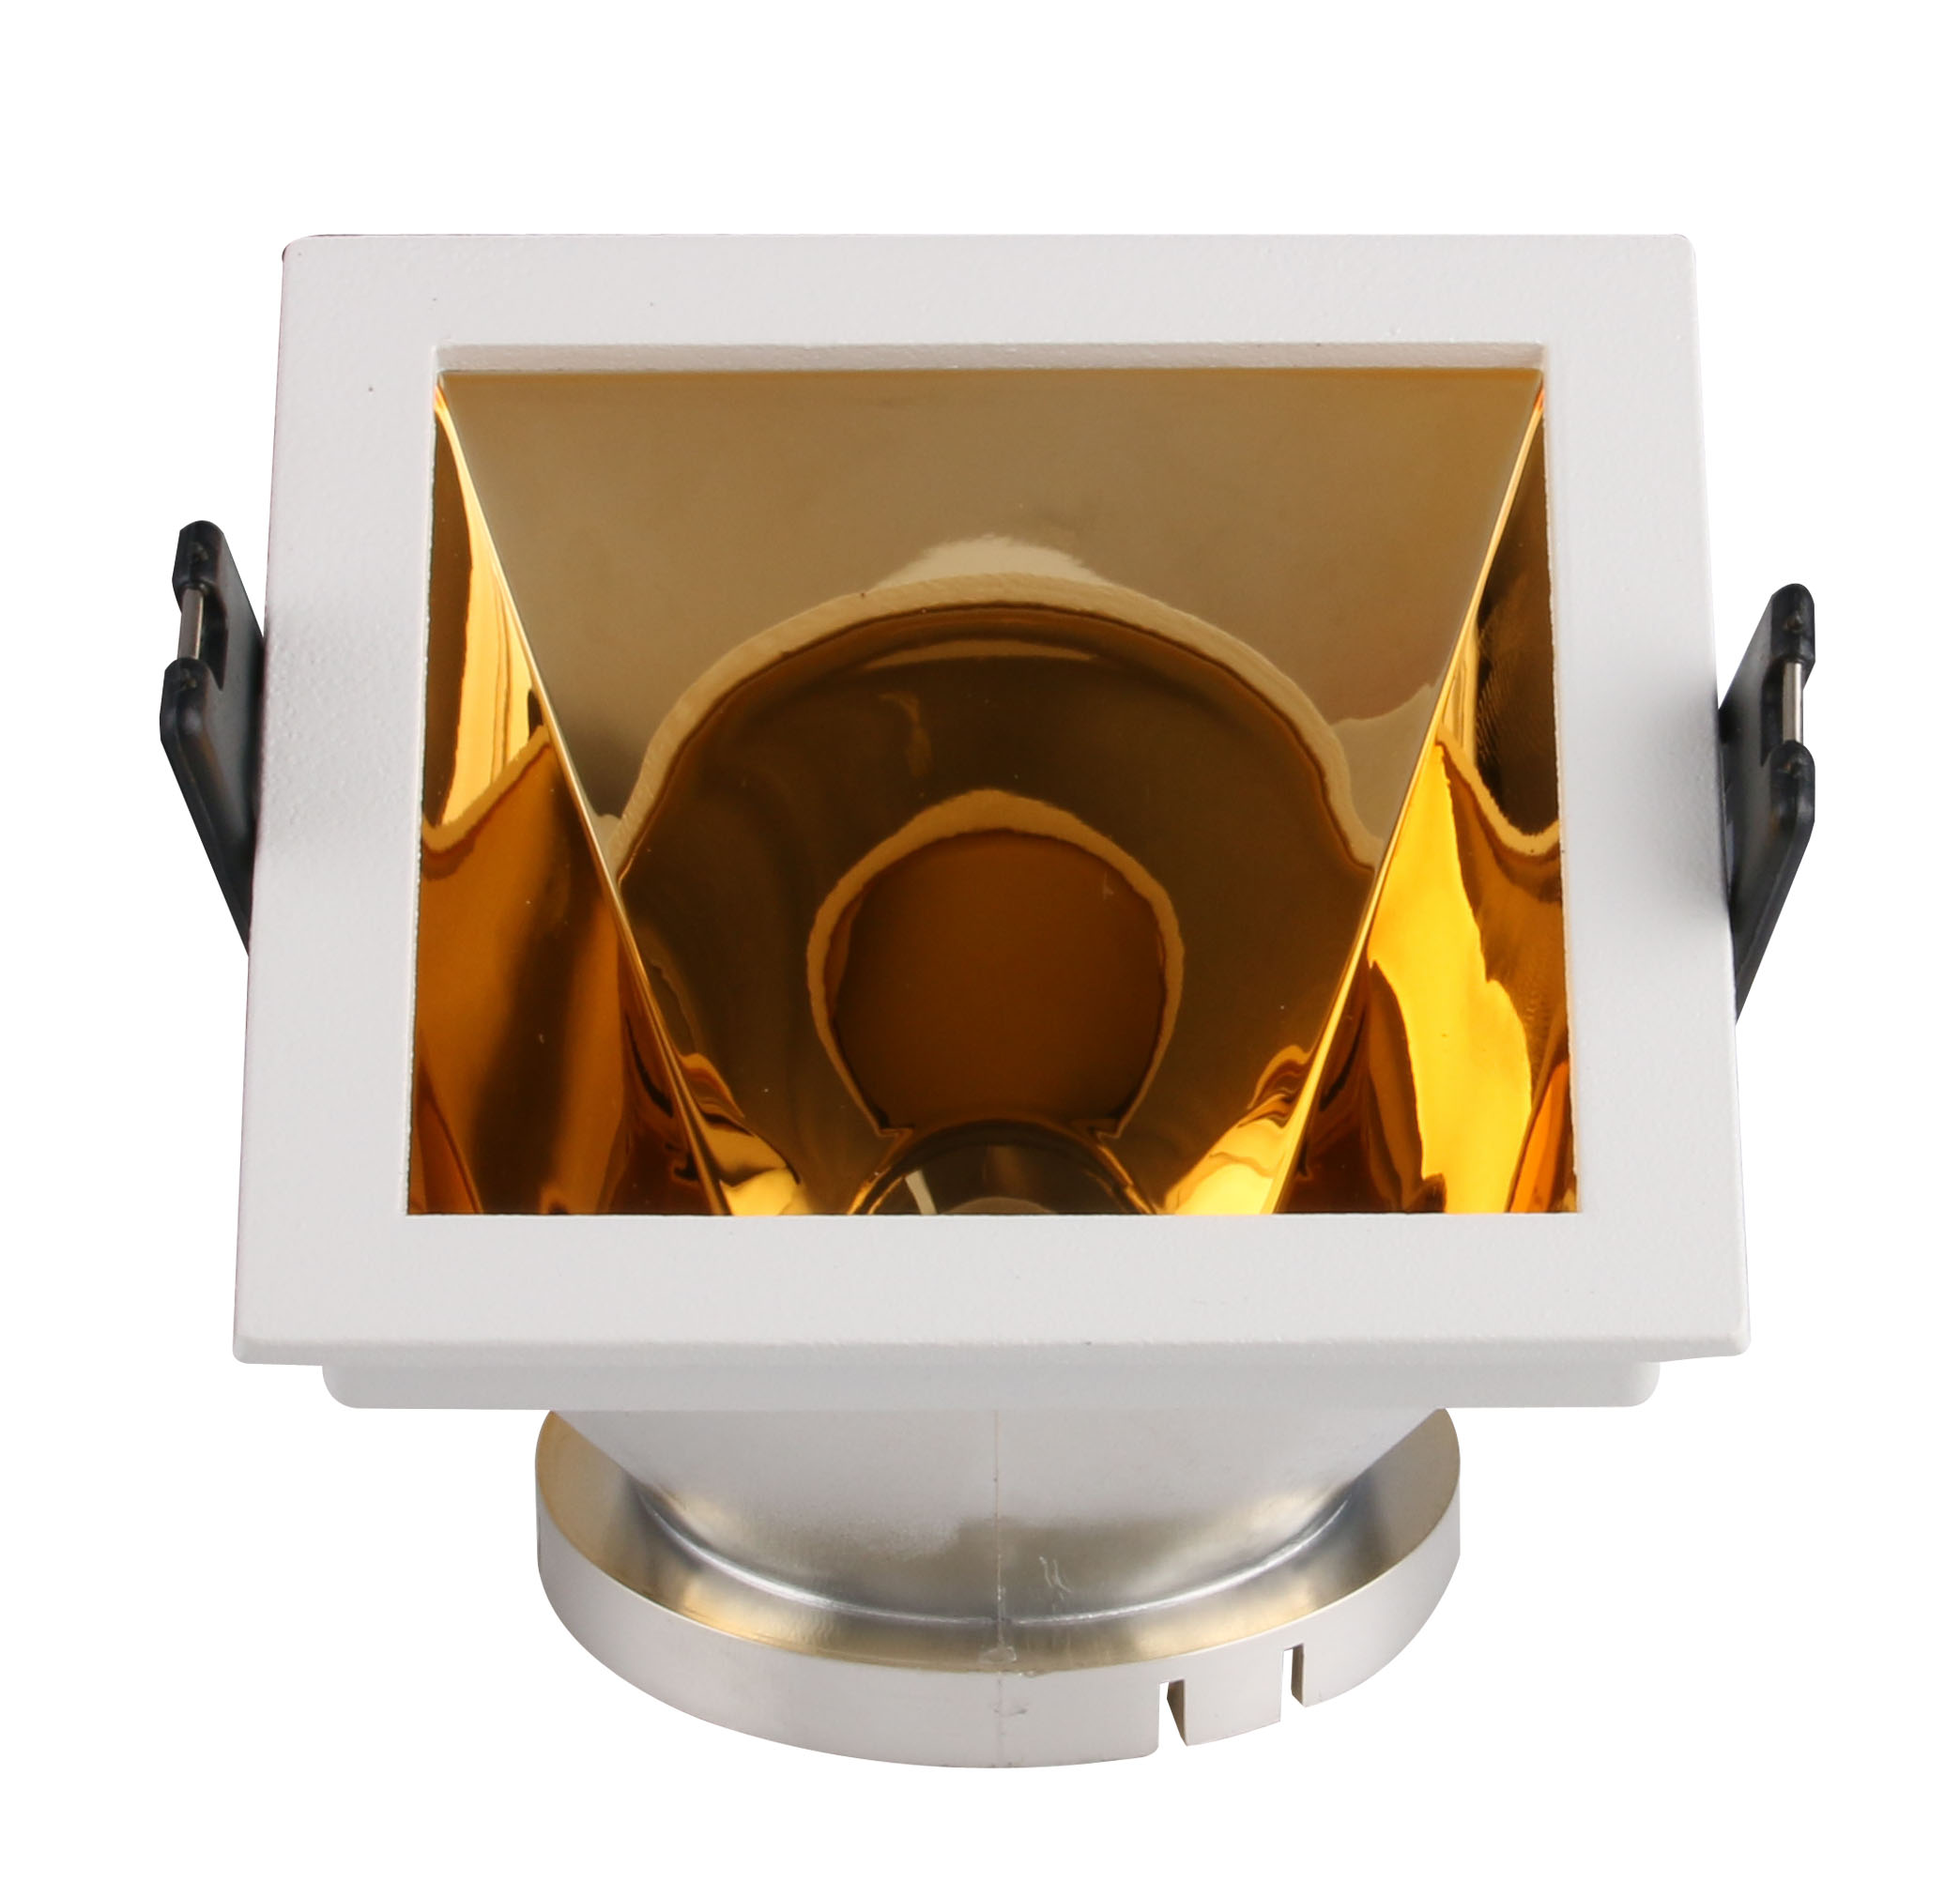 Recessed Commercial LED Downlight Fixture External LED Downlight Fixture 